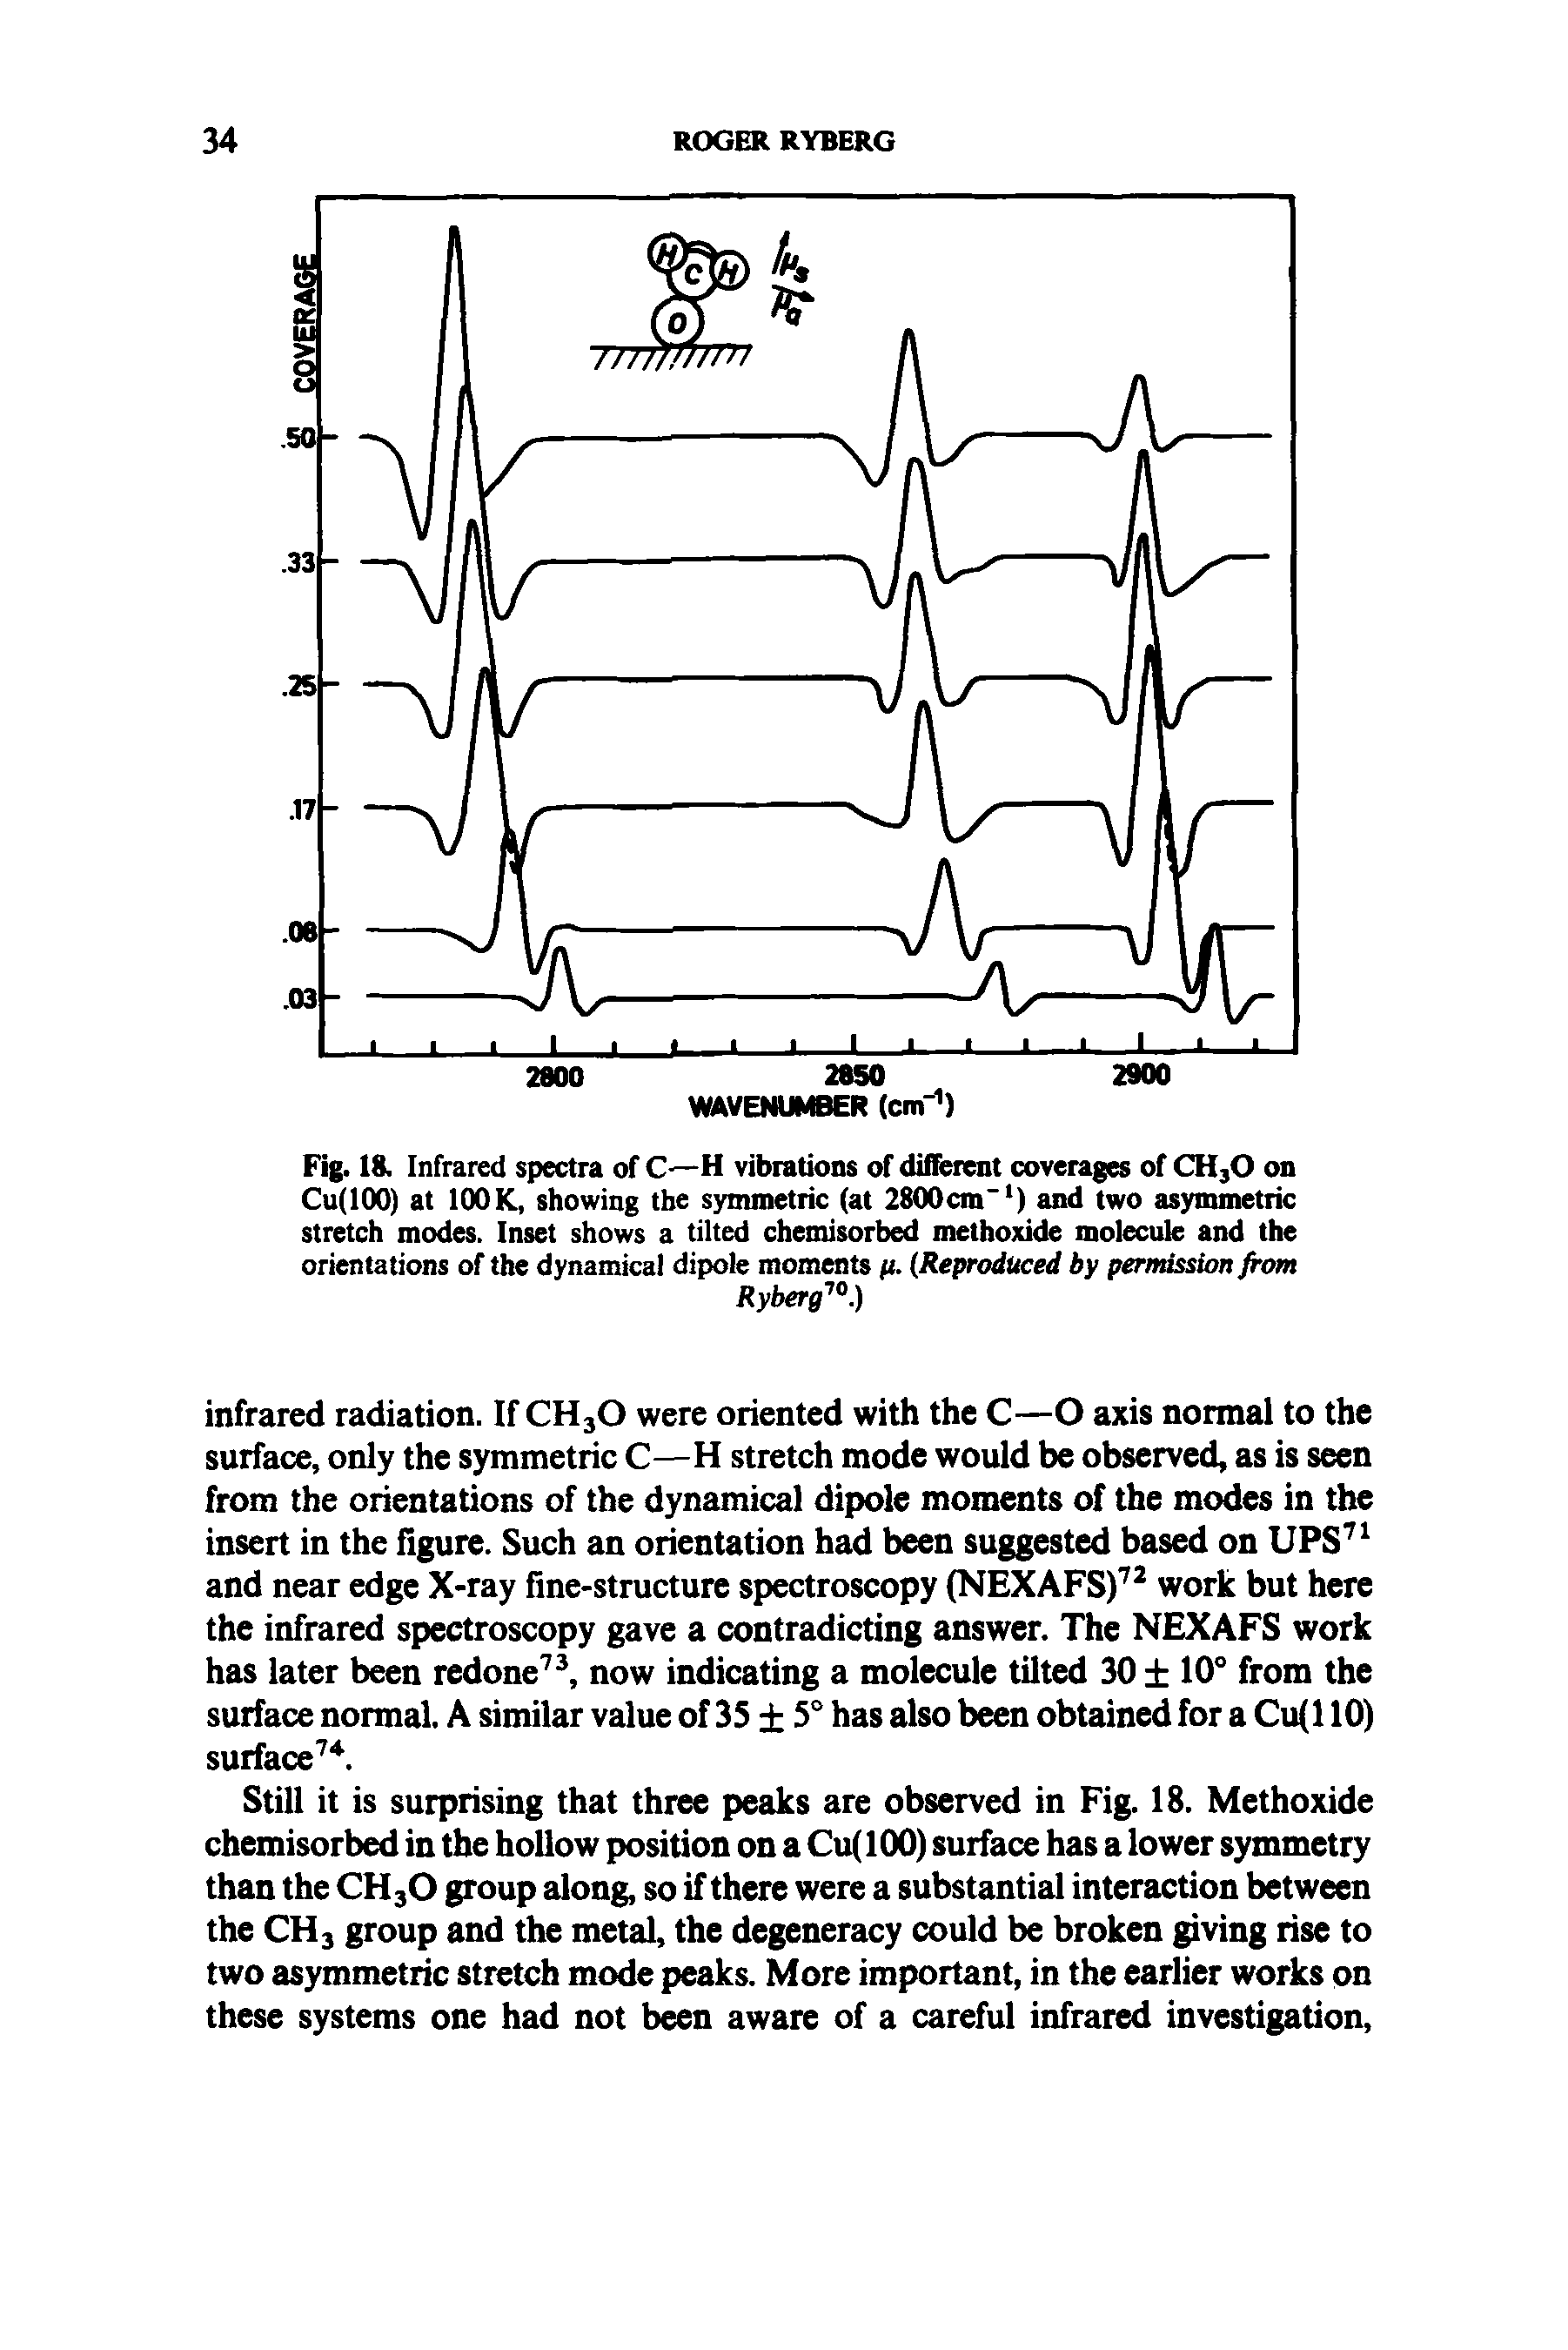 Fig. 18. Infrared spectra of C -H vibrations of different coverages of CH30 on Cu(lOO) at 100K, showing the symmetric (at 2800cm ) and two asymmetric stretch modes. Inset shows a tilted chemisorbed methoxide molecule and the orientations of the dynamical dipole moments ji. (Reproduced by permission from...